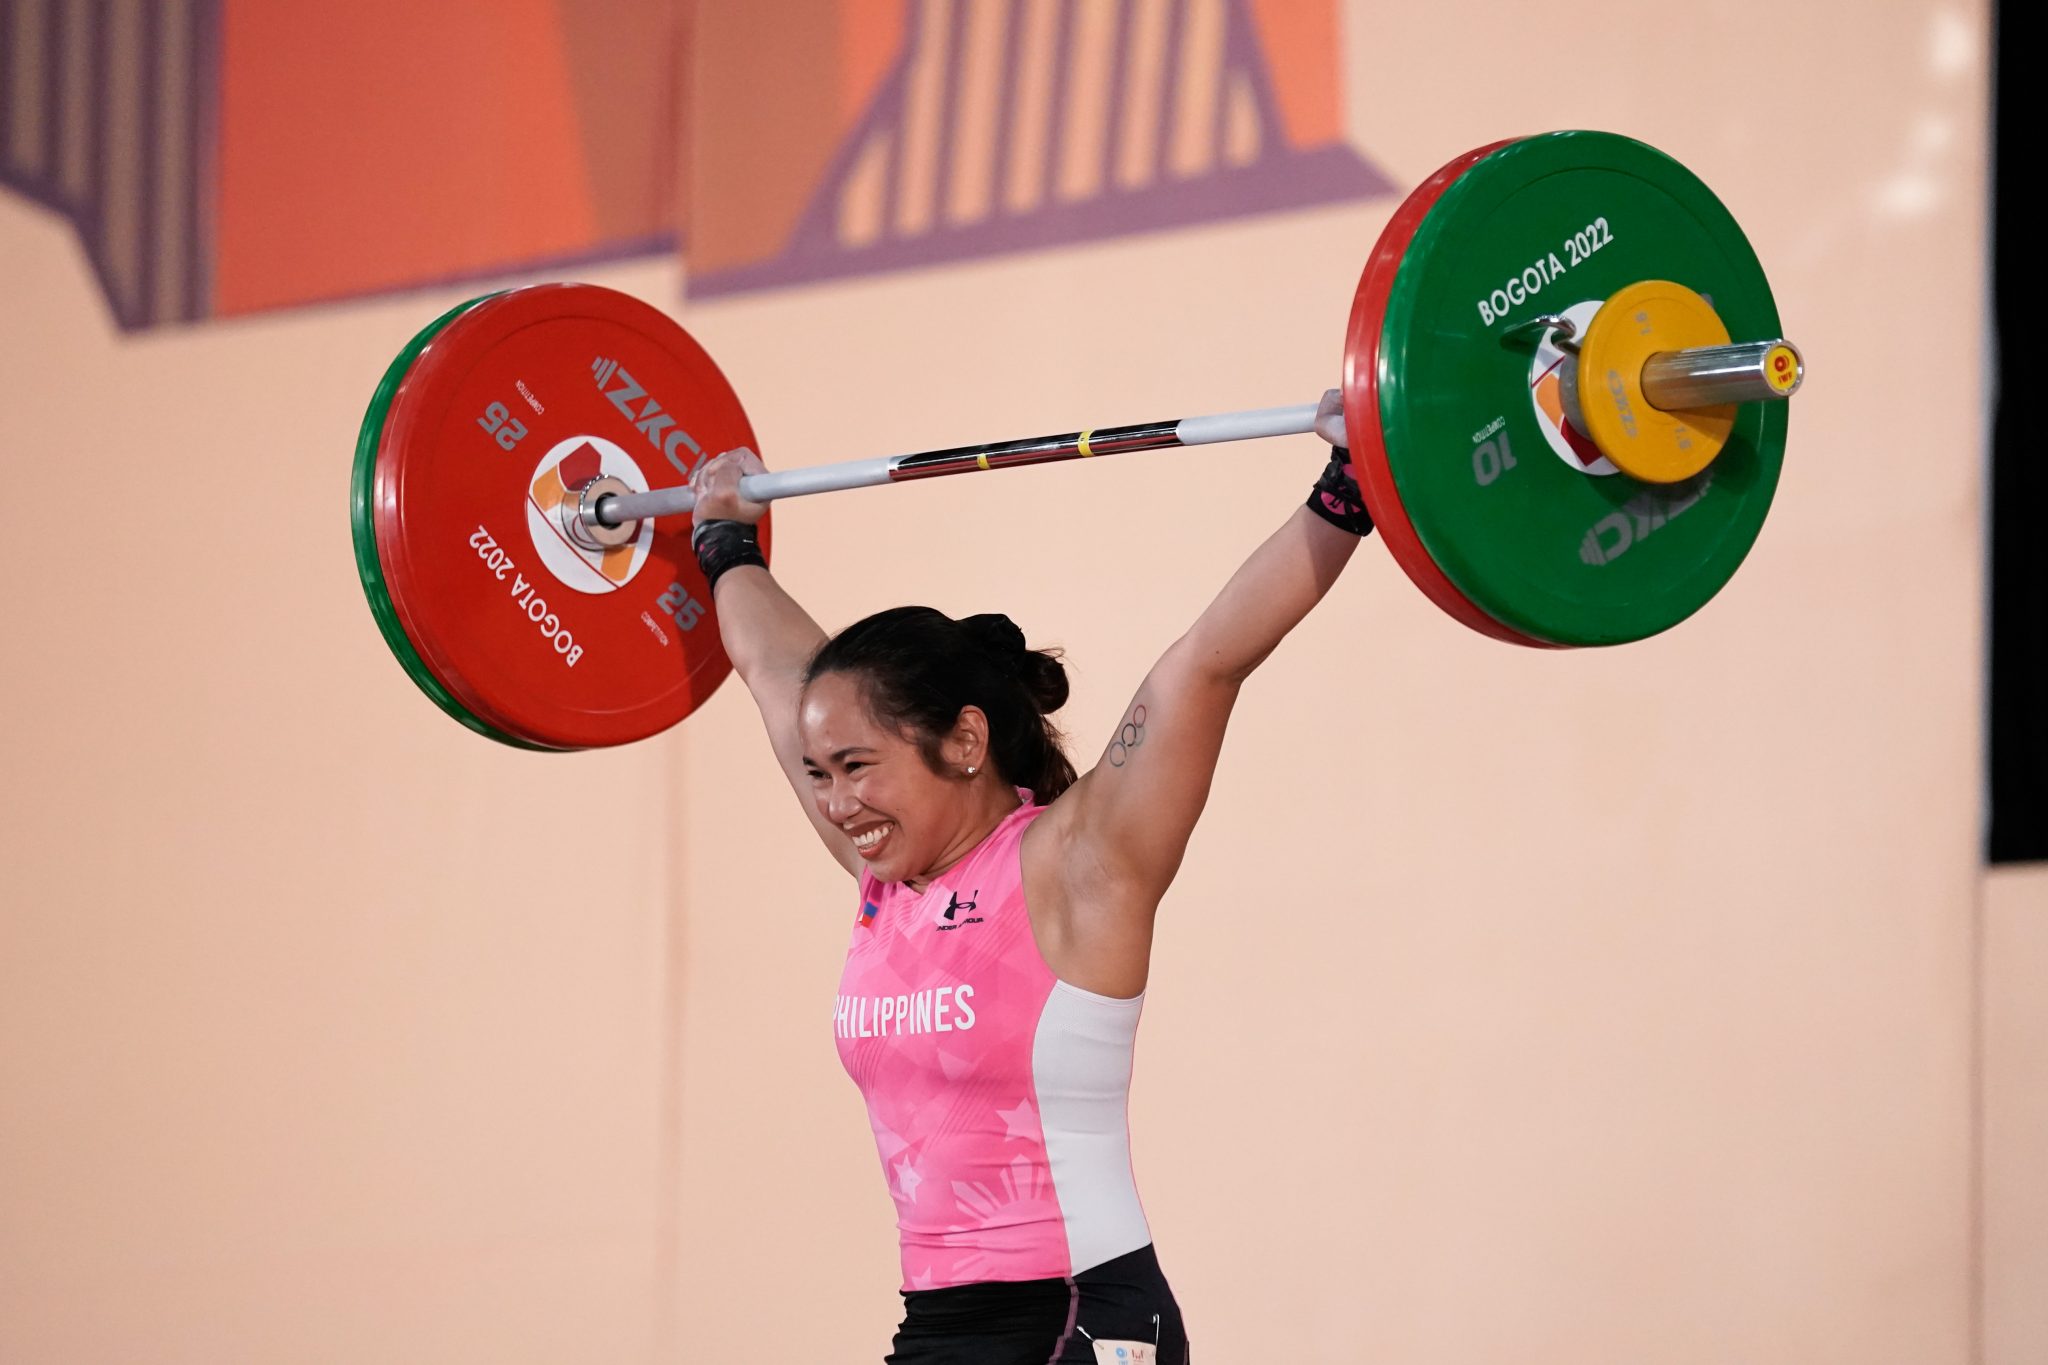 A world title at last for Olympic champion Hidilyn Diaz and world